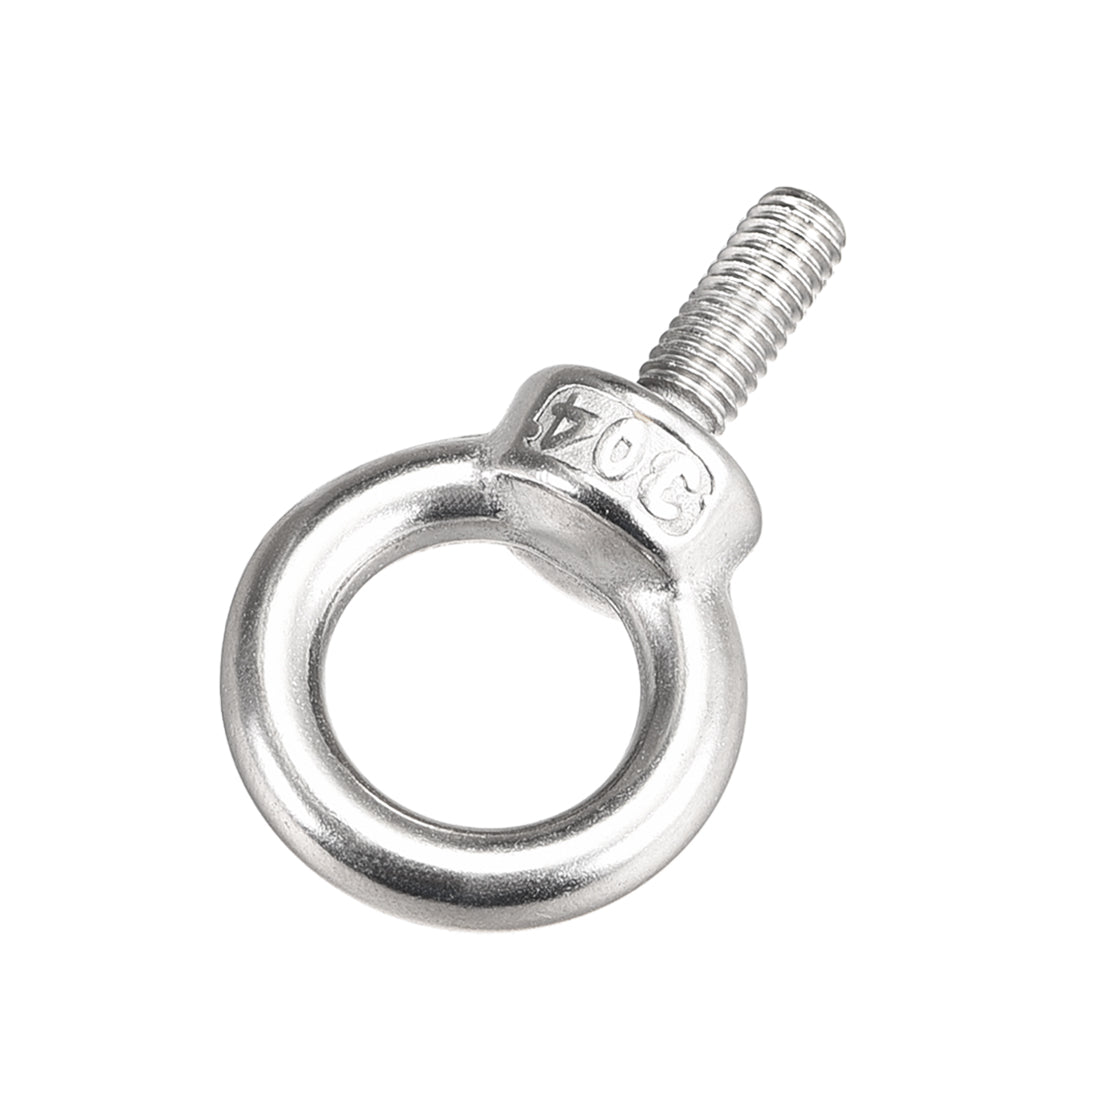 uxcell Uxcell 2 Pcs M6x16mm Thread 16mm Inside Dia 27mm Outside Dia 304 Stainless Steel Lifting Eye Bolt